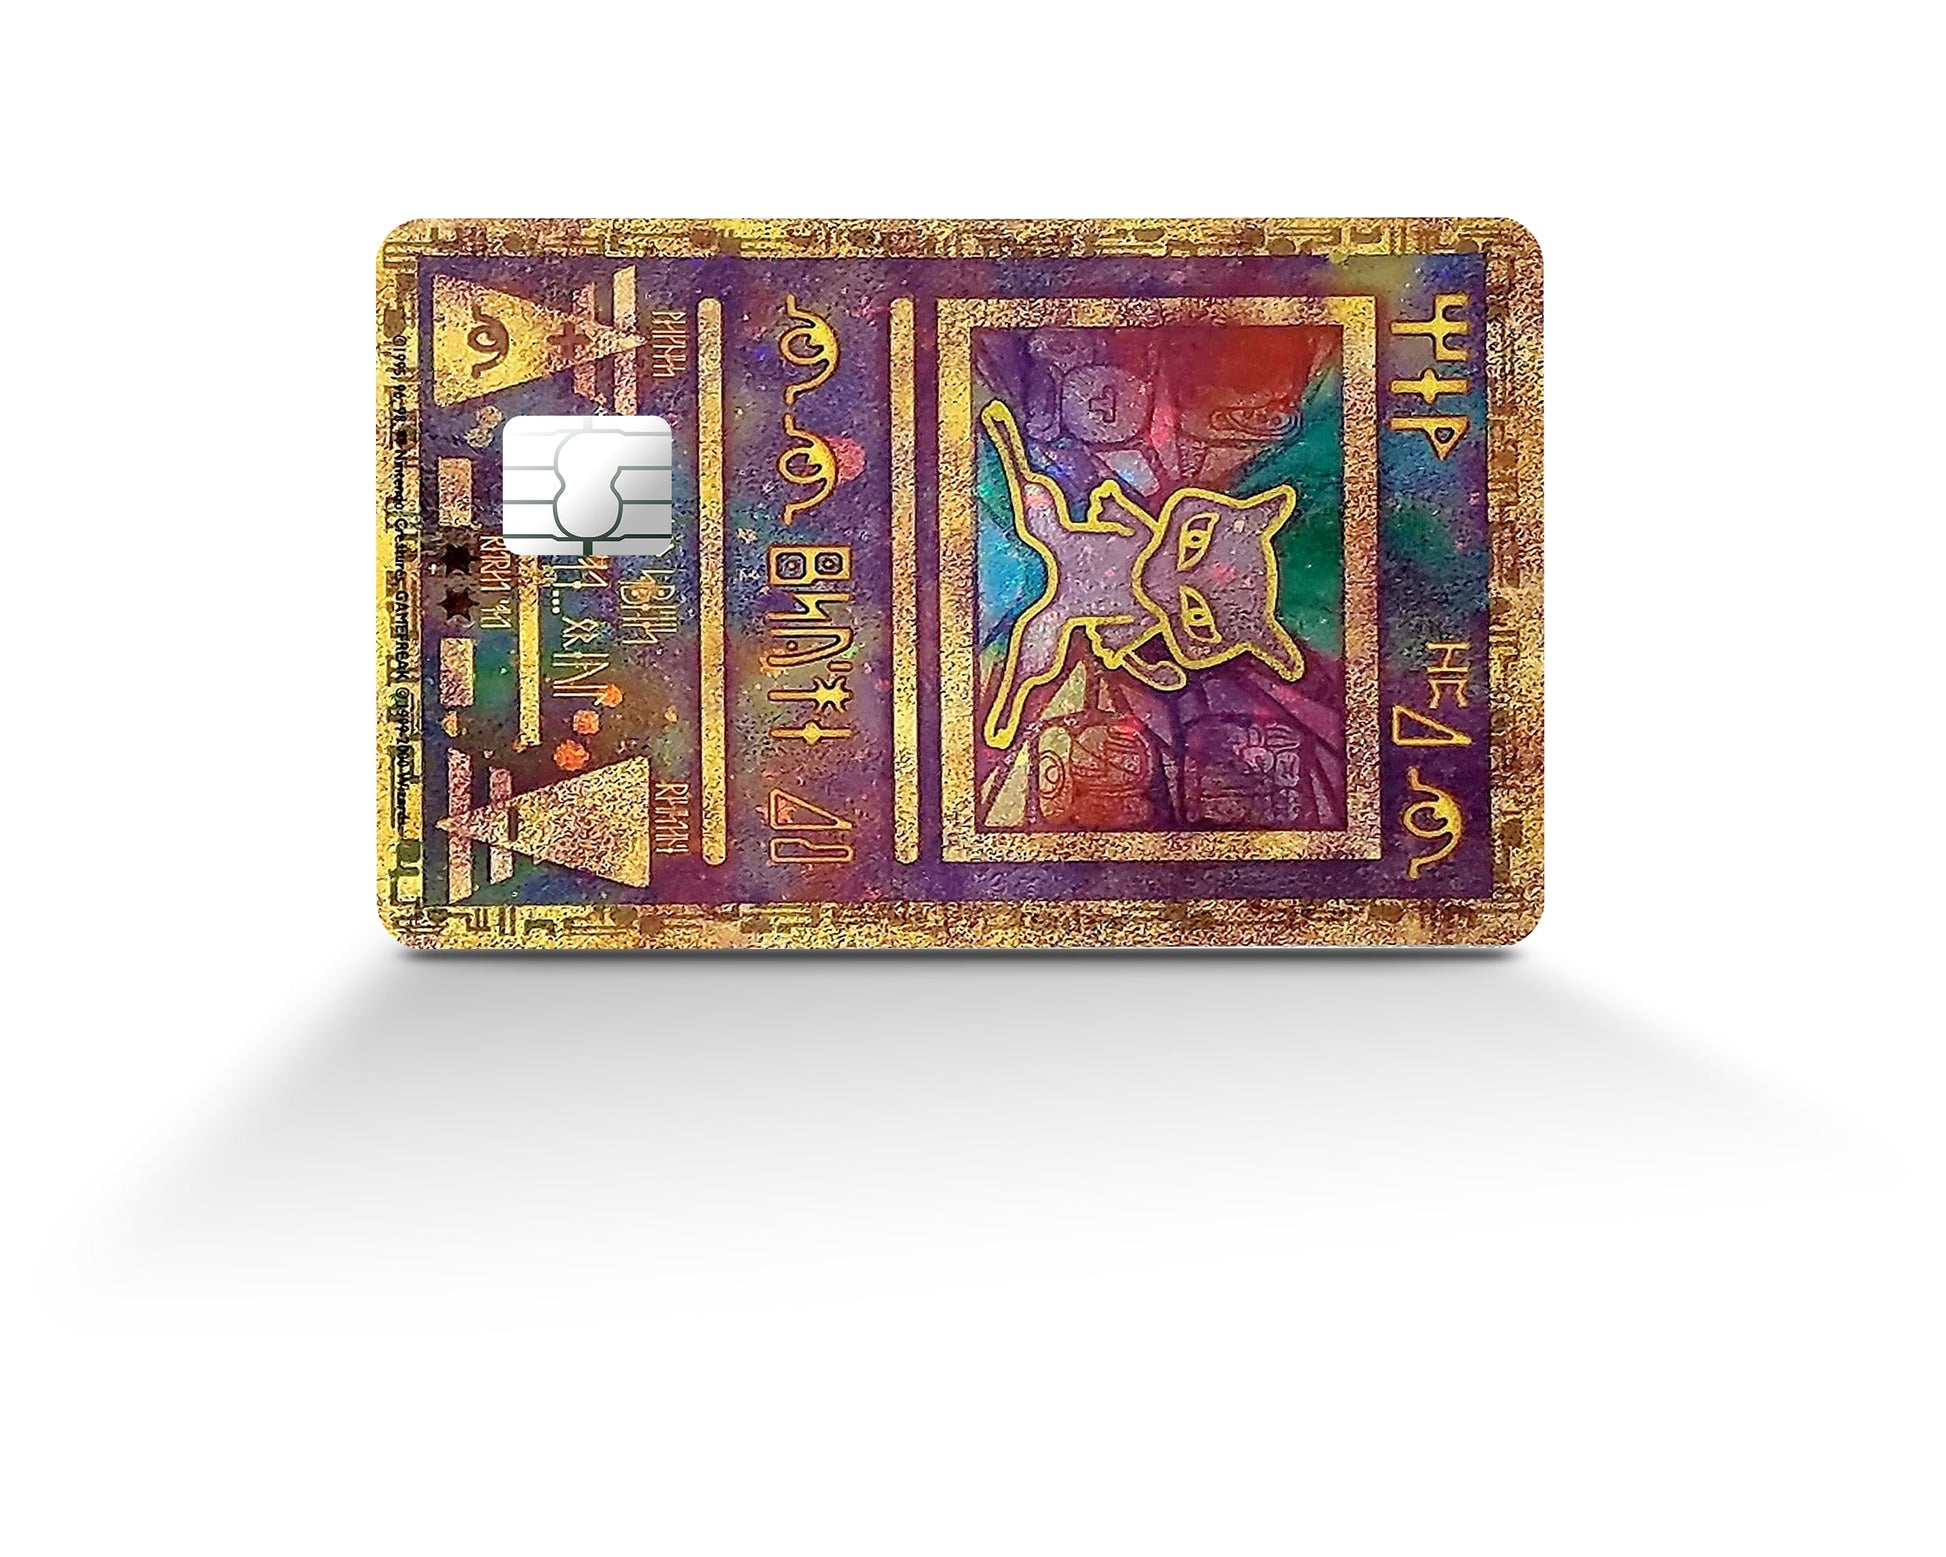 Ancient Mew Pokemon Card Credit Card Credit Card Skin – Anime Town Creations